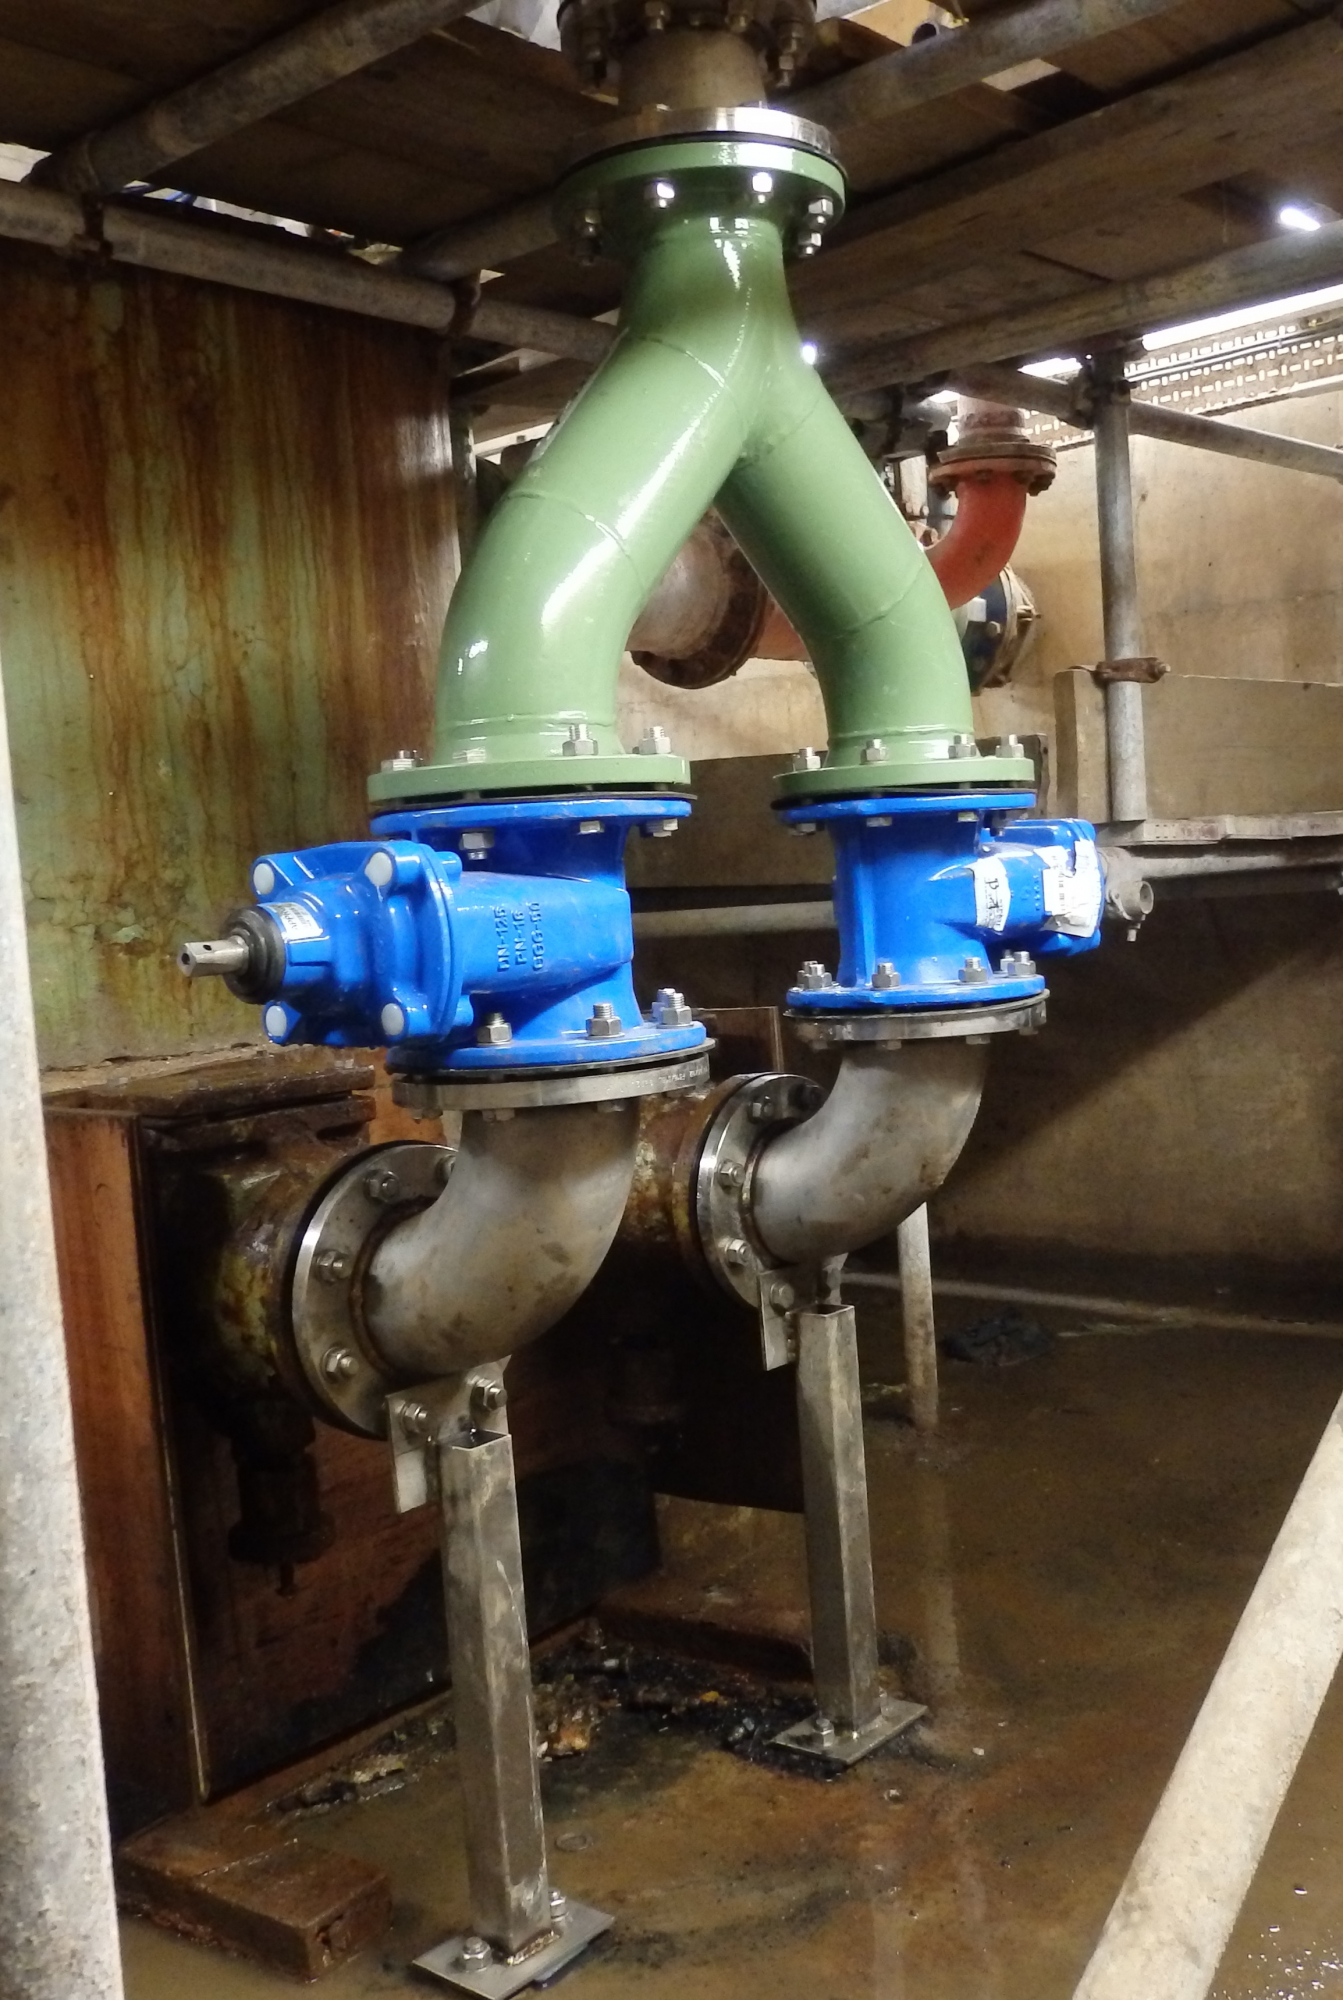 Pipework installation to refurbish existing SPS